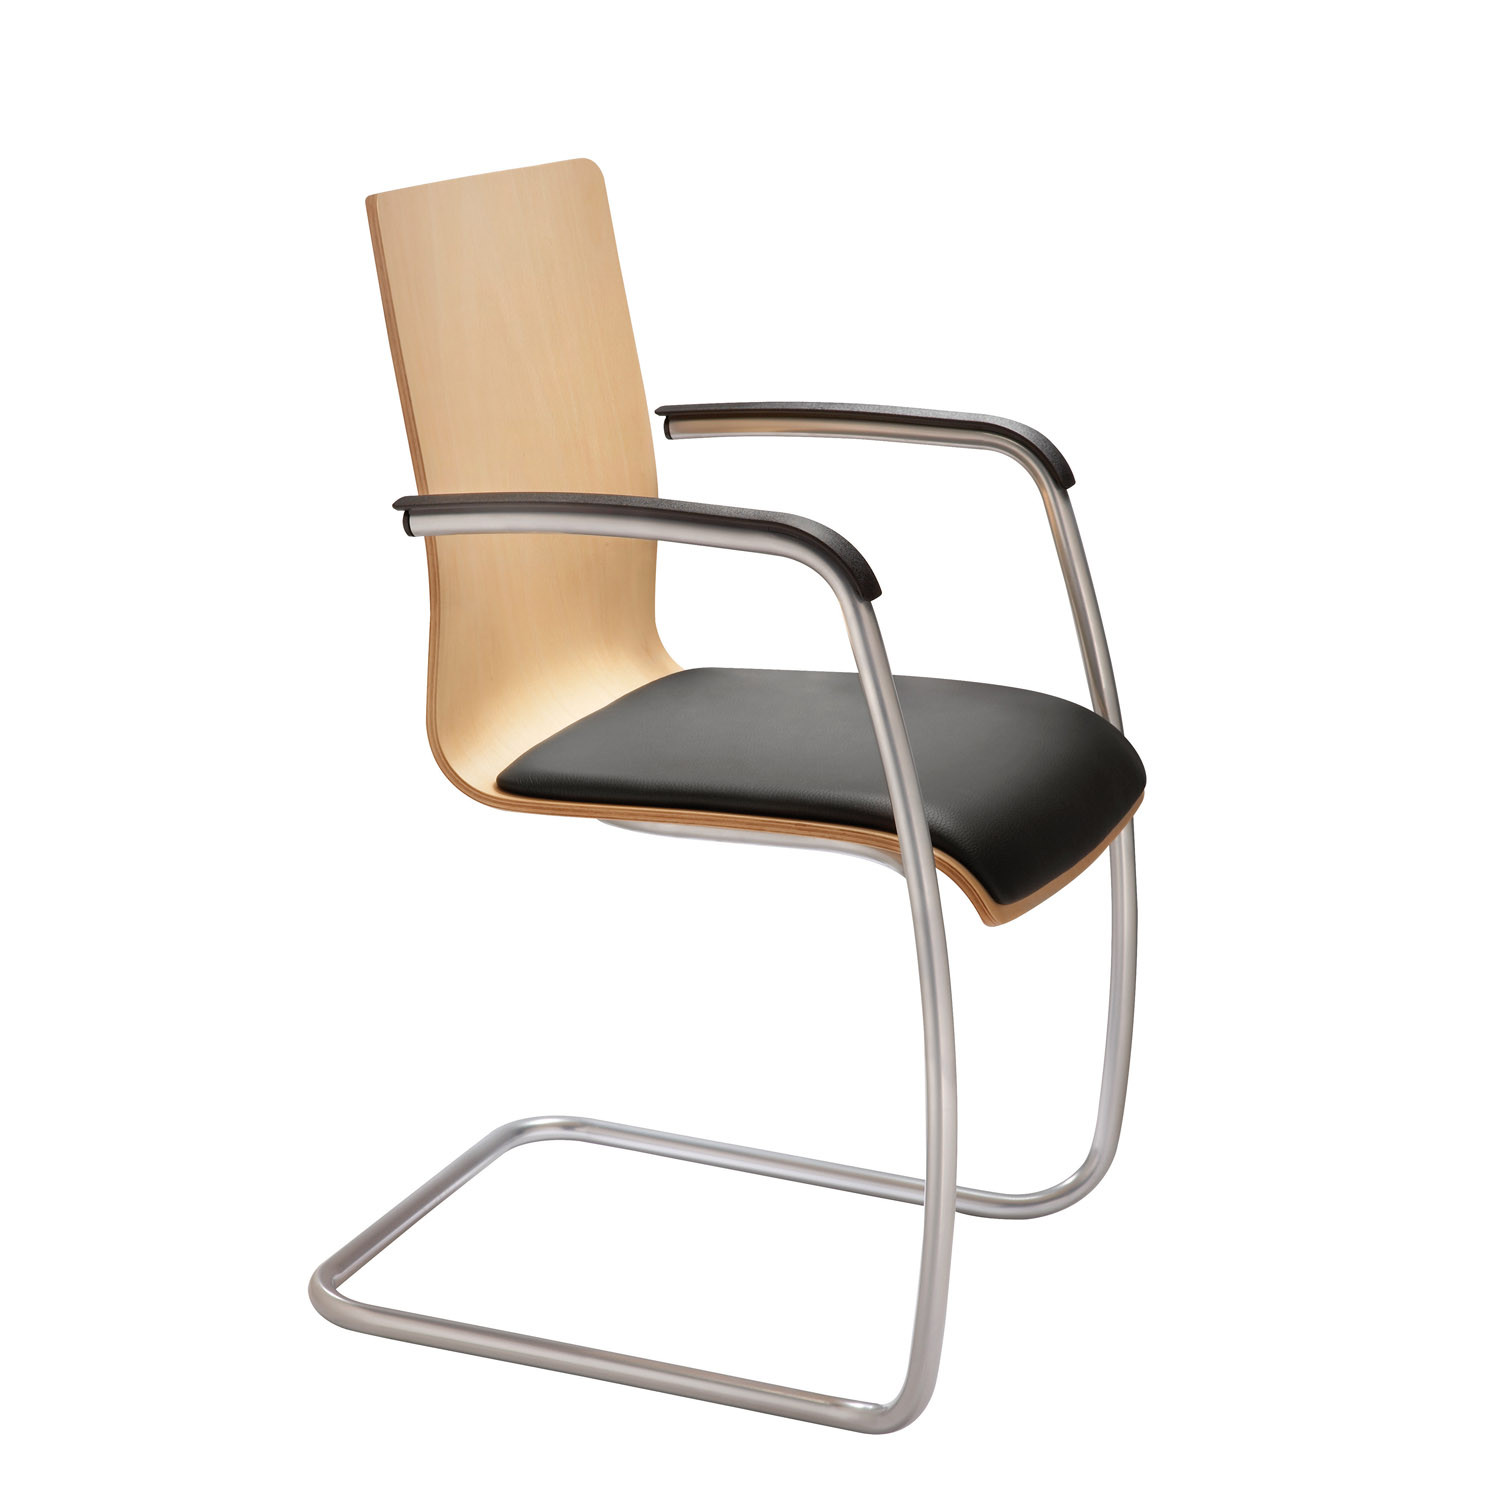 Team Cantilever Chairs from Connection